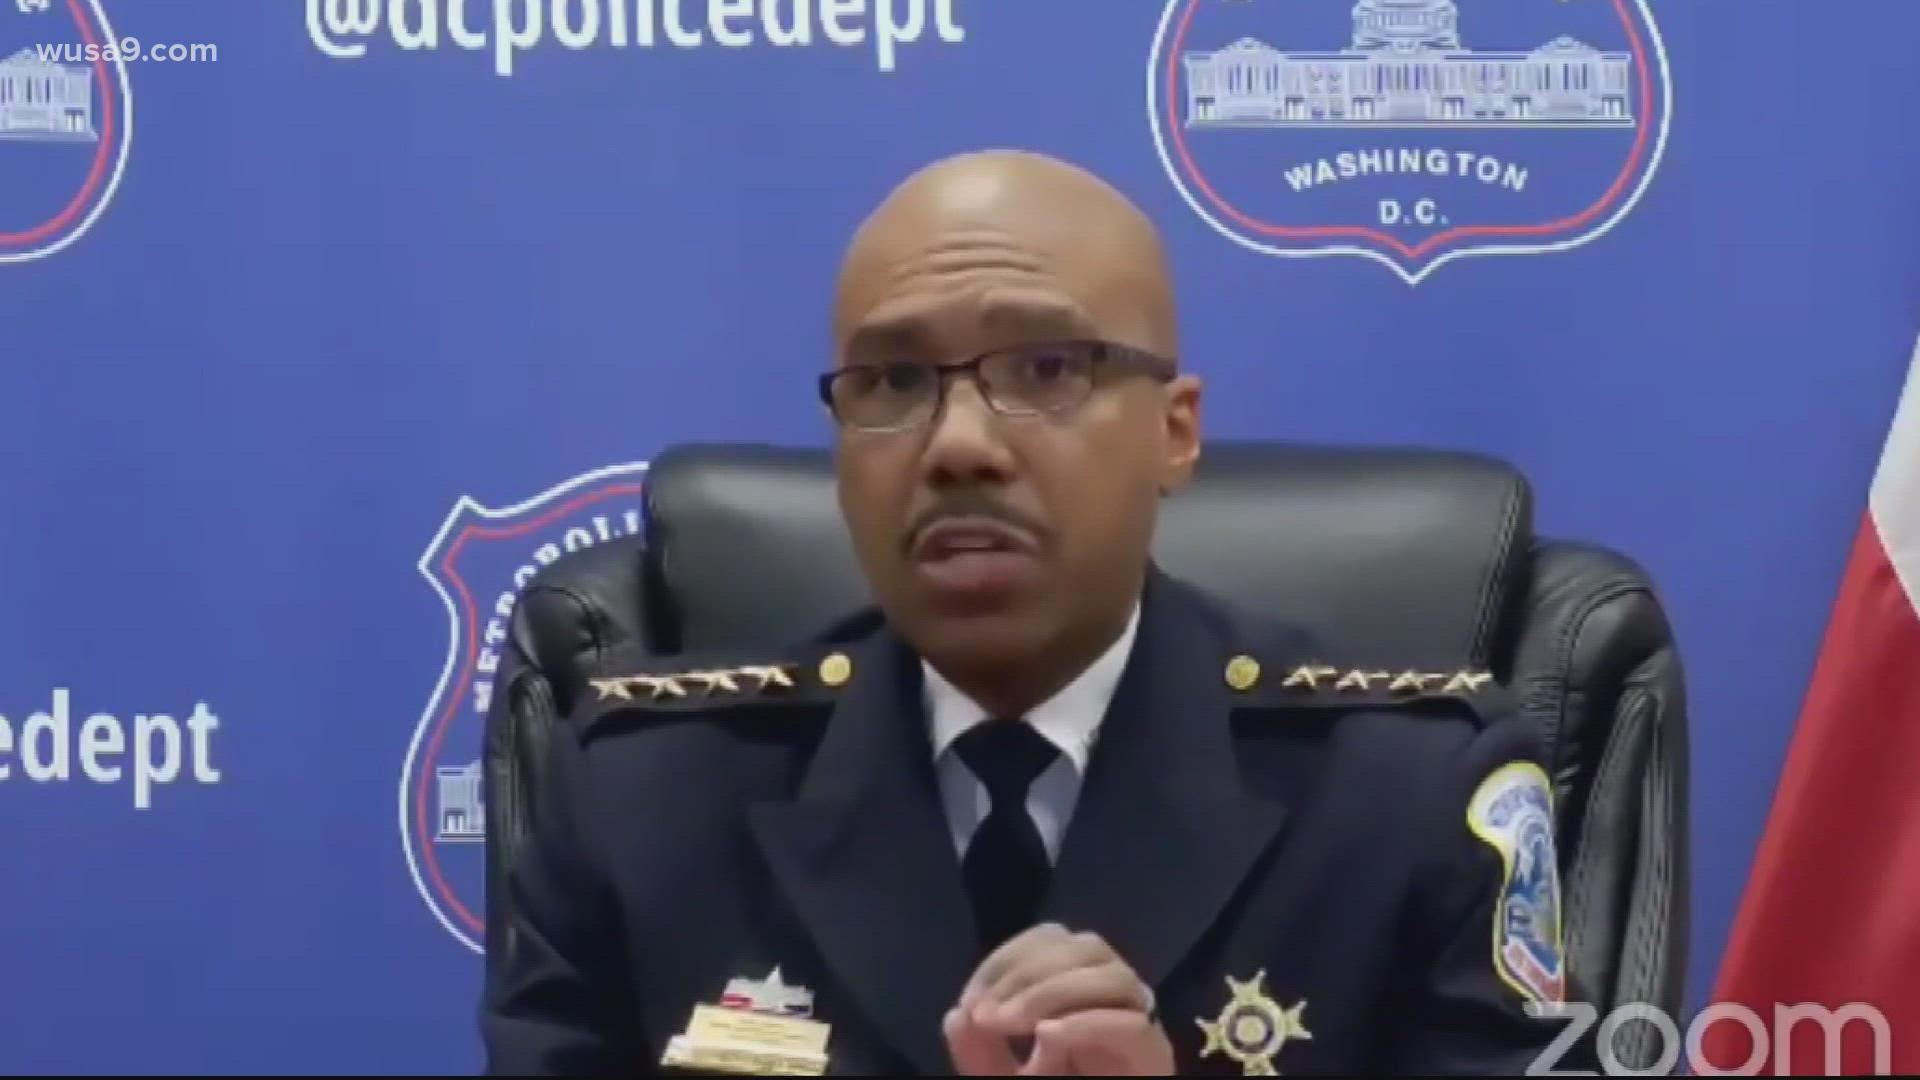 Robert Contee, chief of Metropolitan Police Department, spoke at an oversight hearing about the rise in crimes in the District involving children.